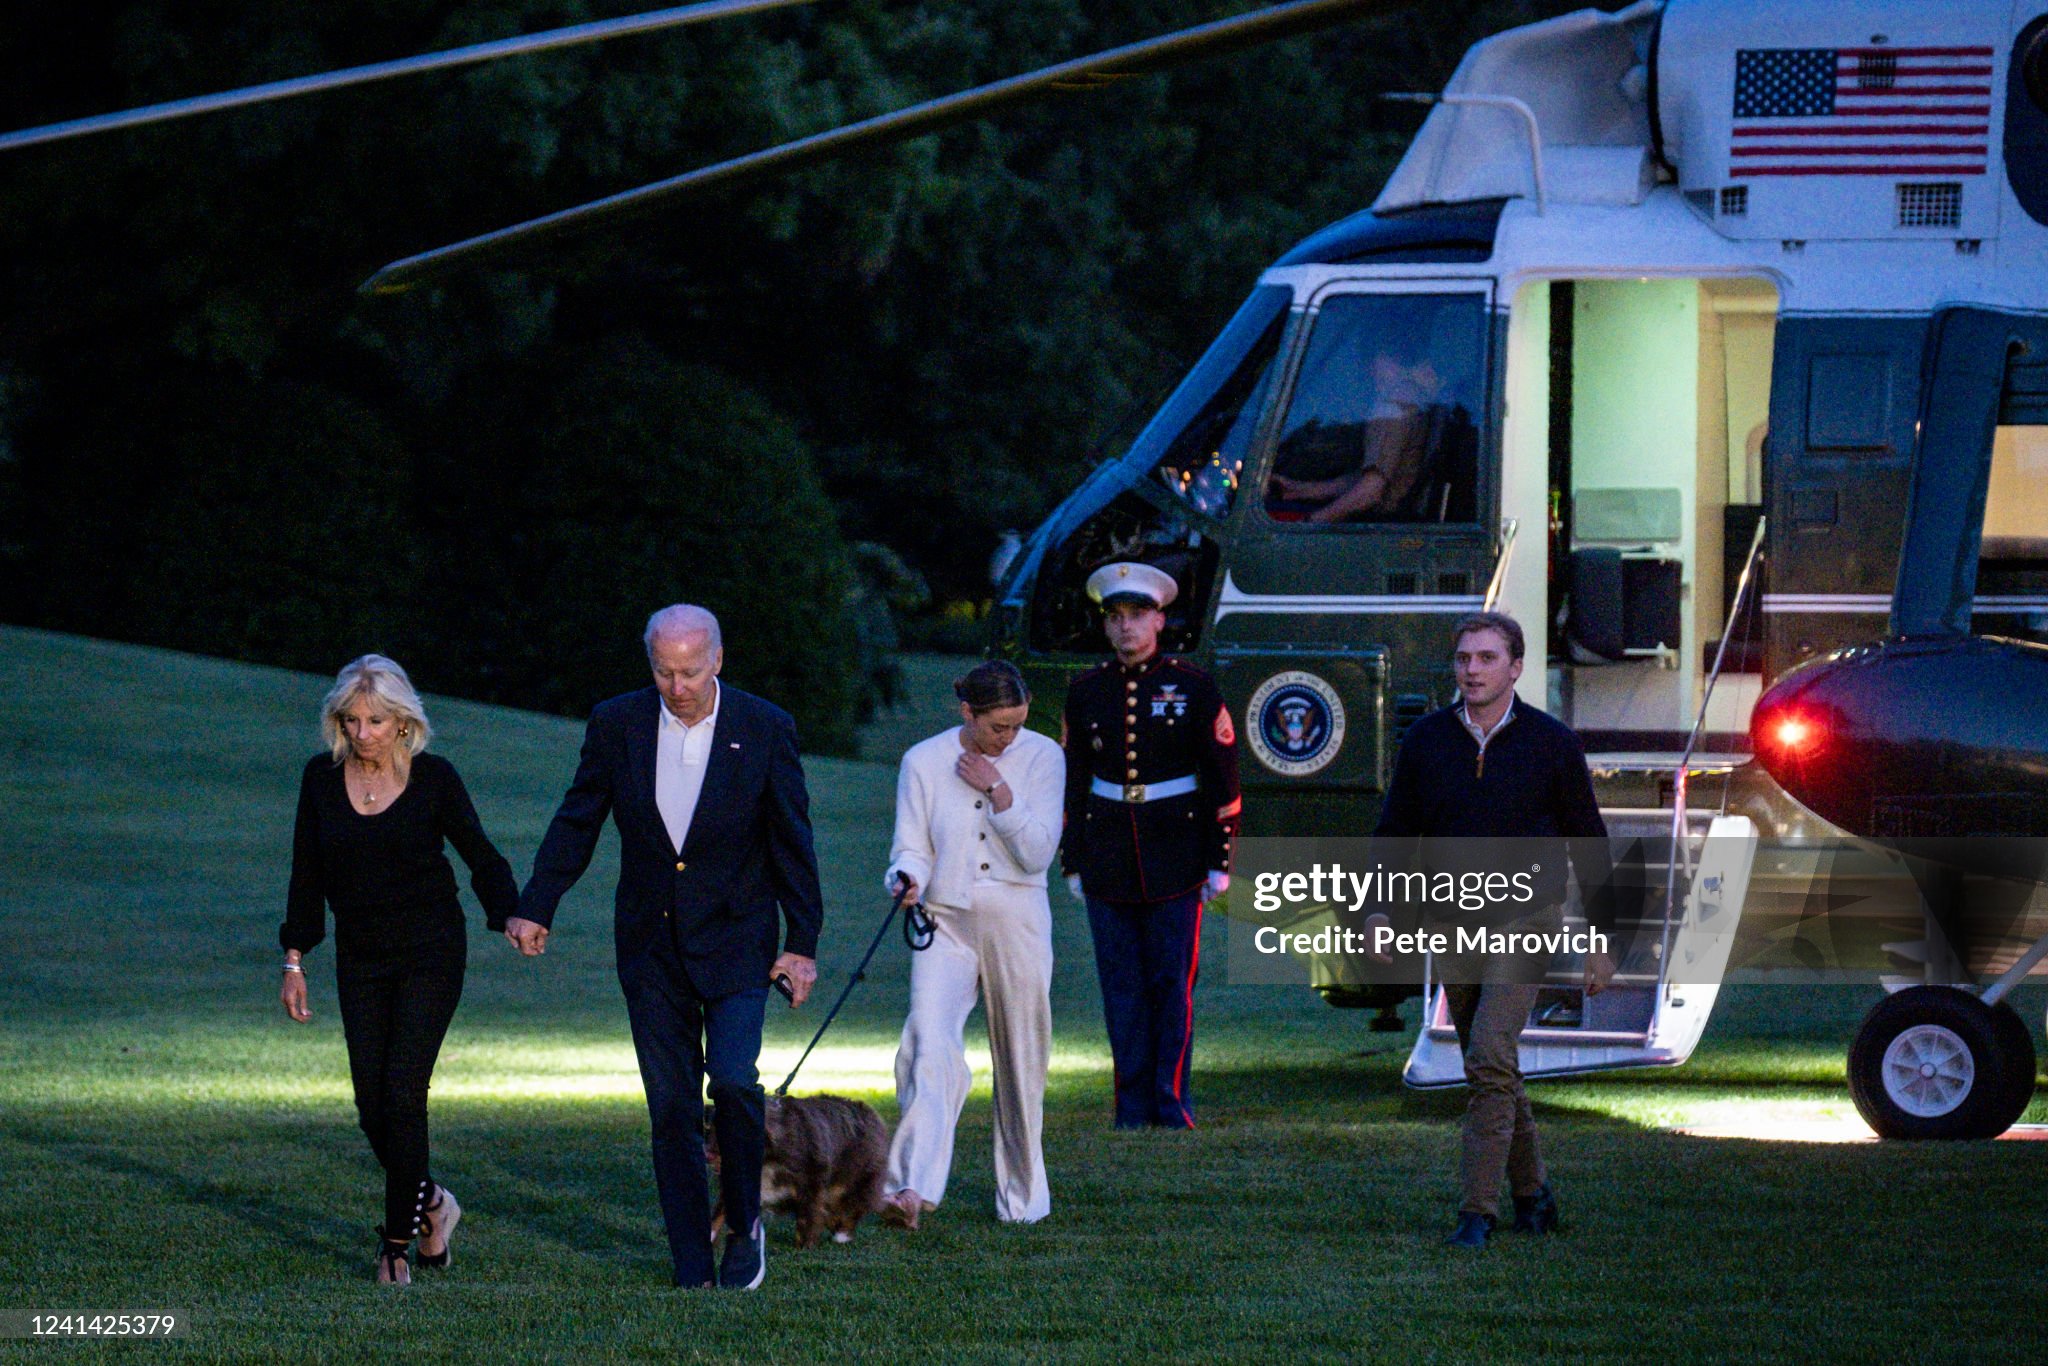 president-biden-returns-to-the-white-house-after-long-weekend-in-delaware.jpg